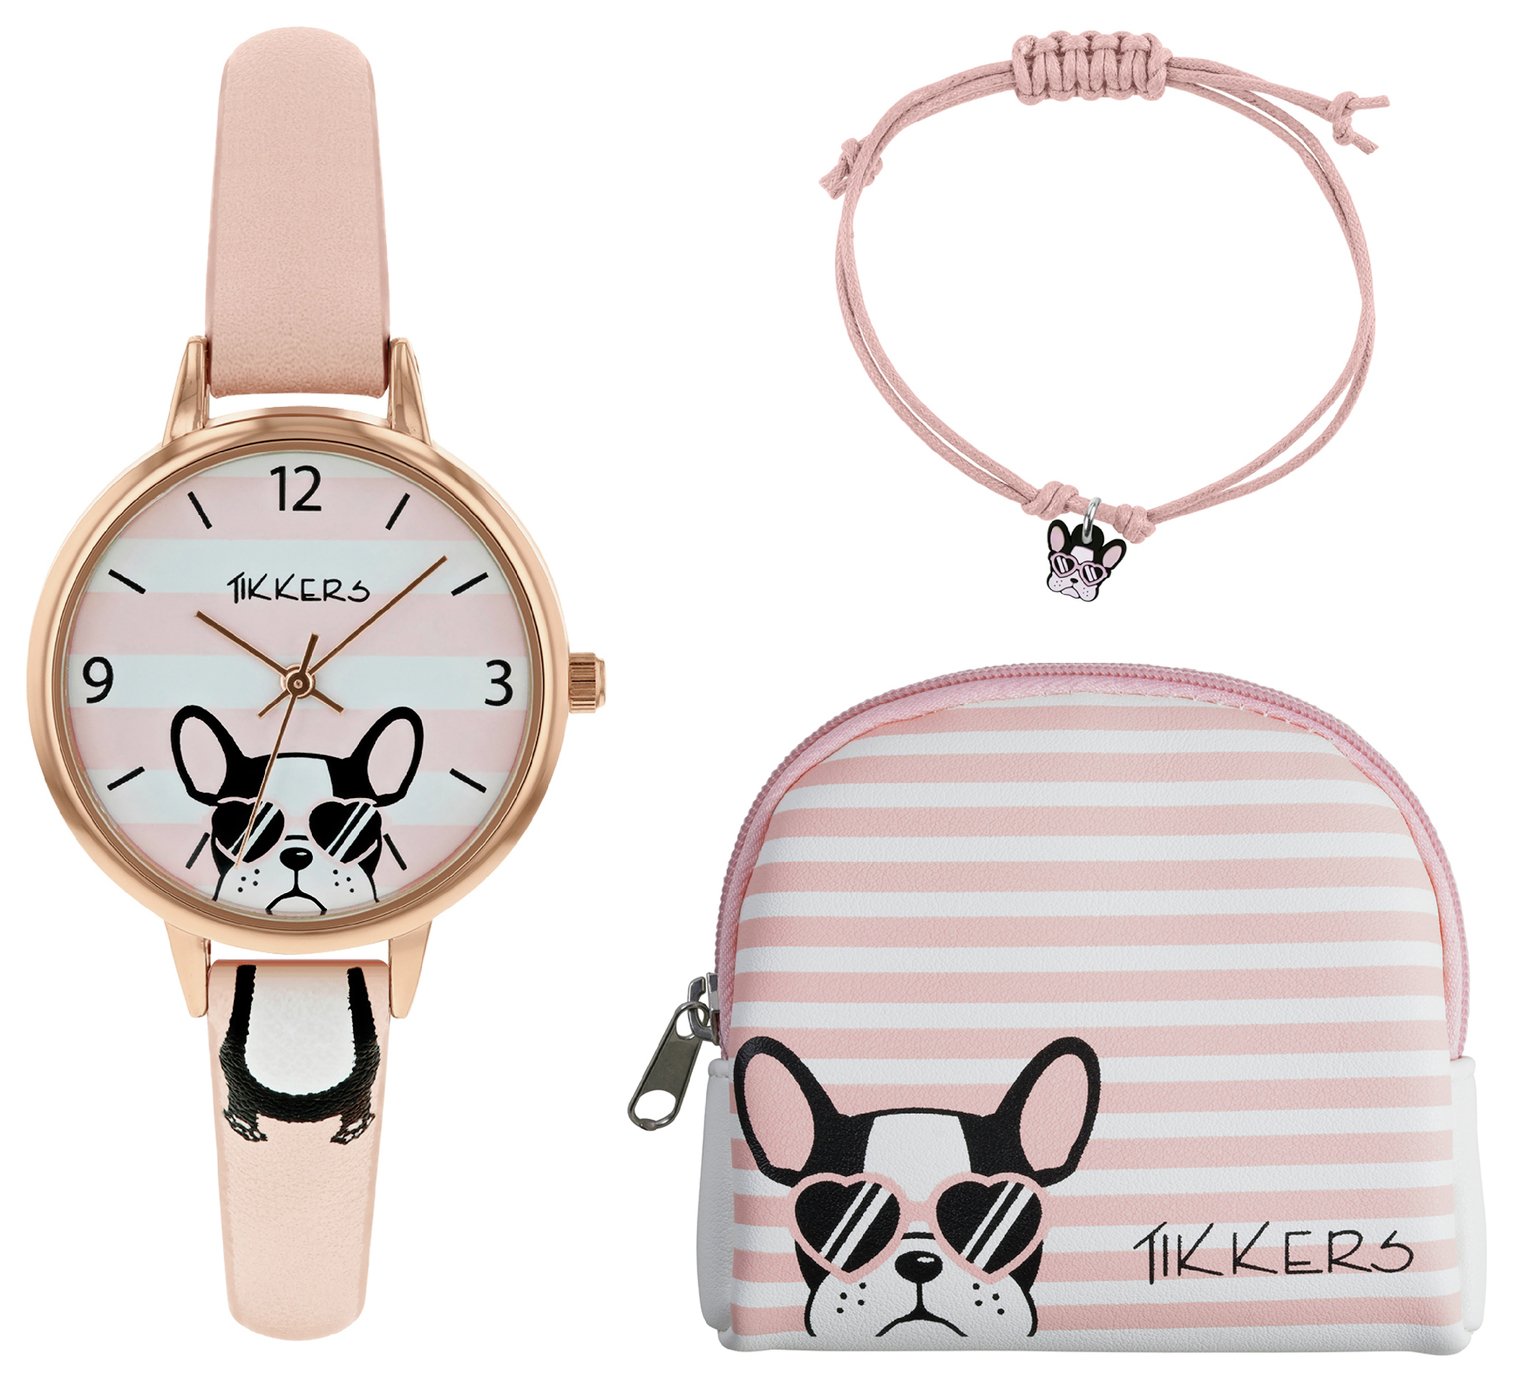 Tikkers Pink Dial Watch Purse and Charm Bracelet Set